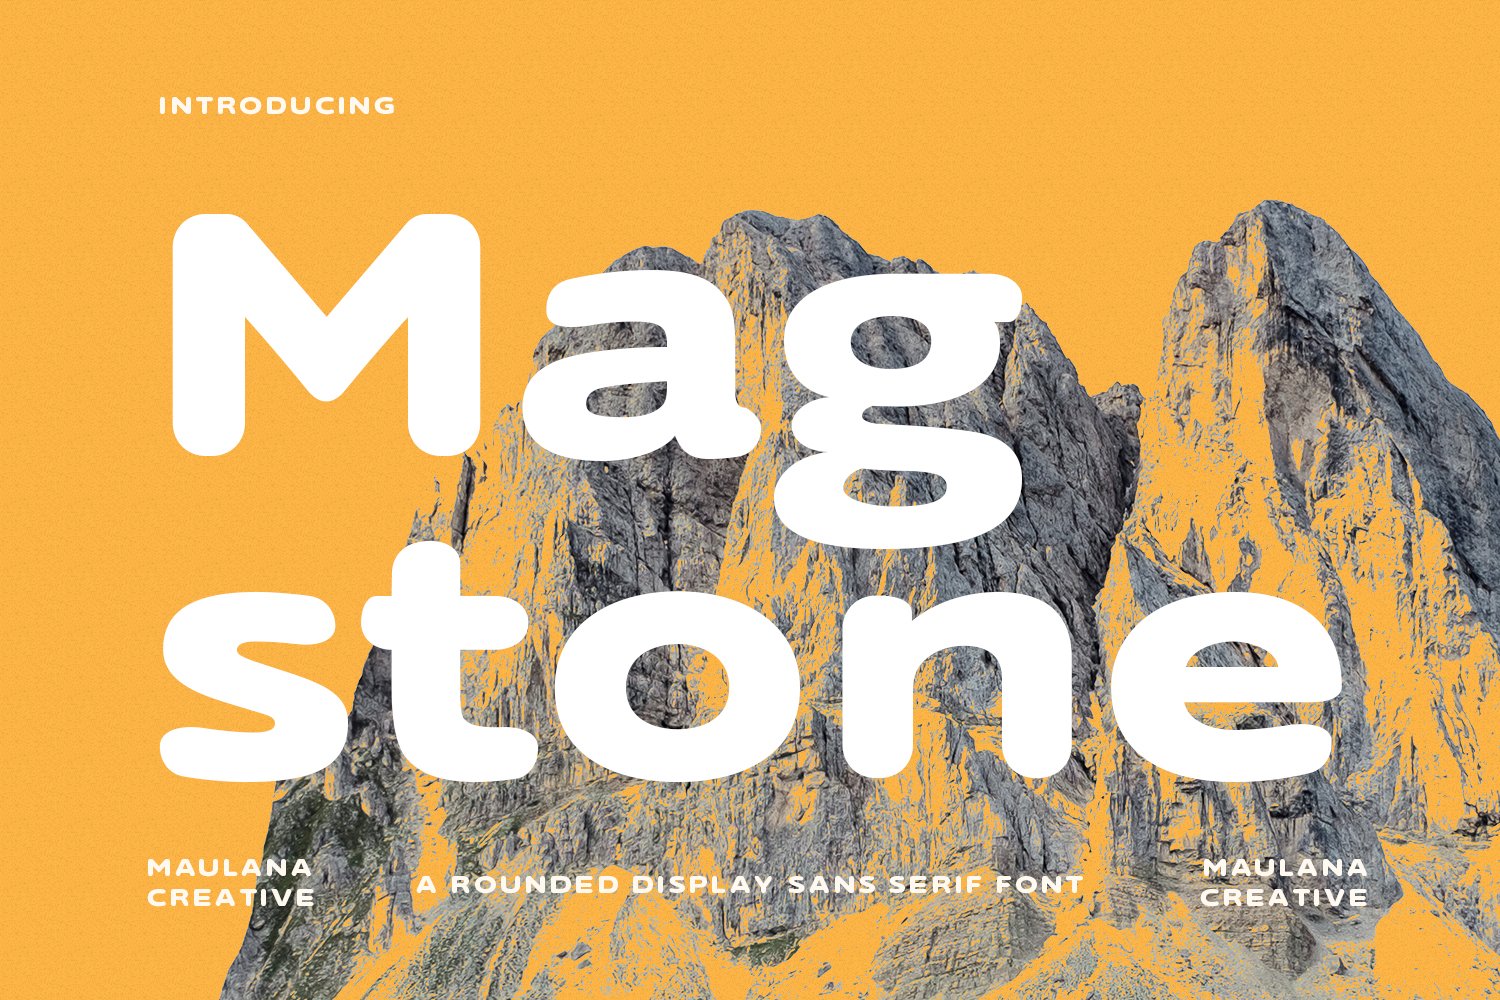 Magstone Sans Round Display Font cover image.